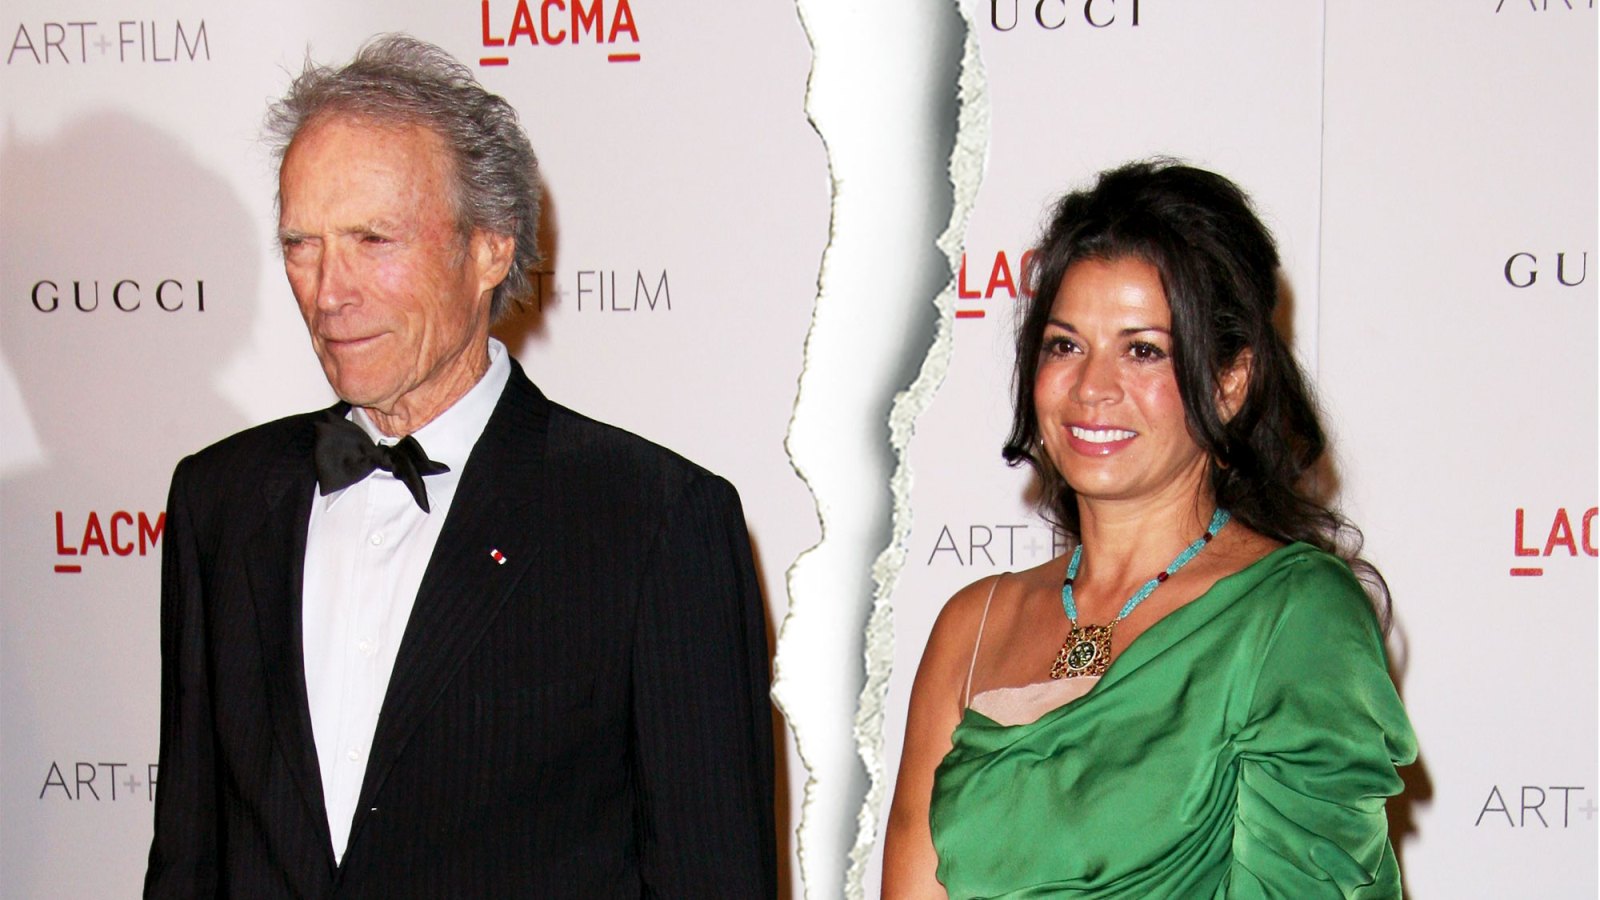 Clint-Eastwood-Wife-Dina-Eastwood-Separate-After-17-Years-of-Marriage-Clint-Eastwood-Dina-Eastwood